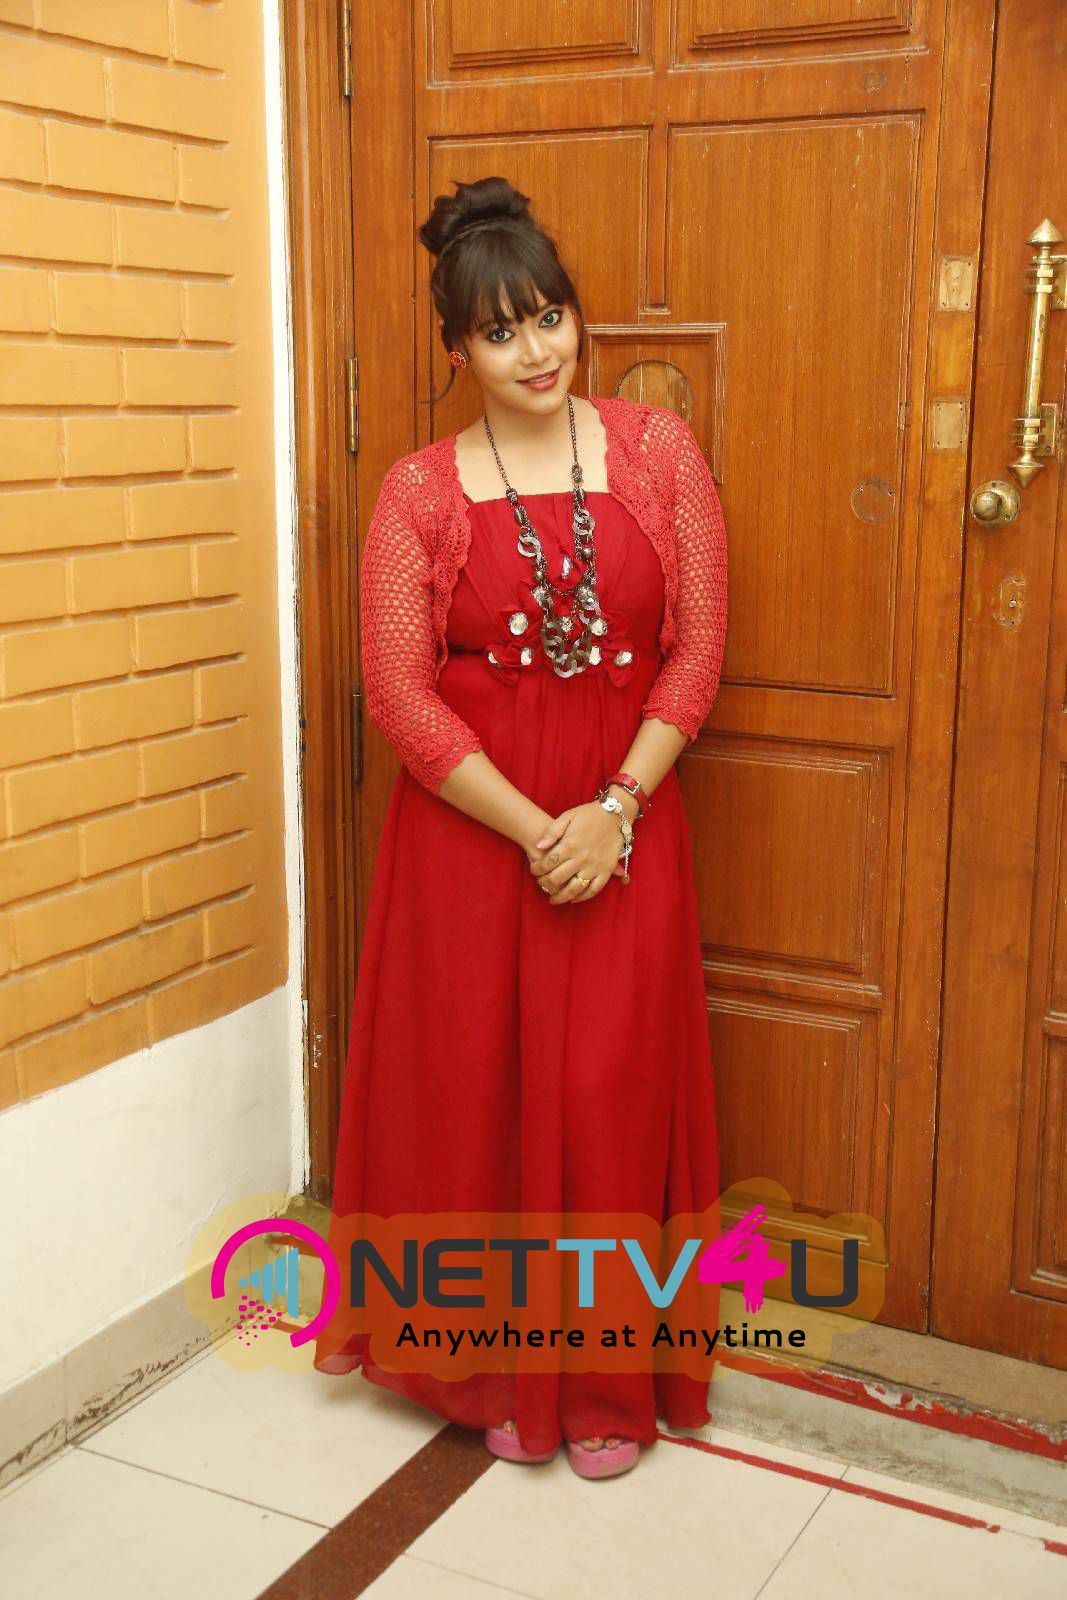 latest photos of tollywood actress anusha in red dress 31